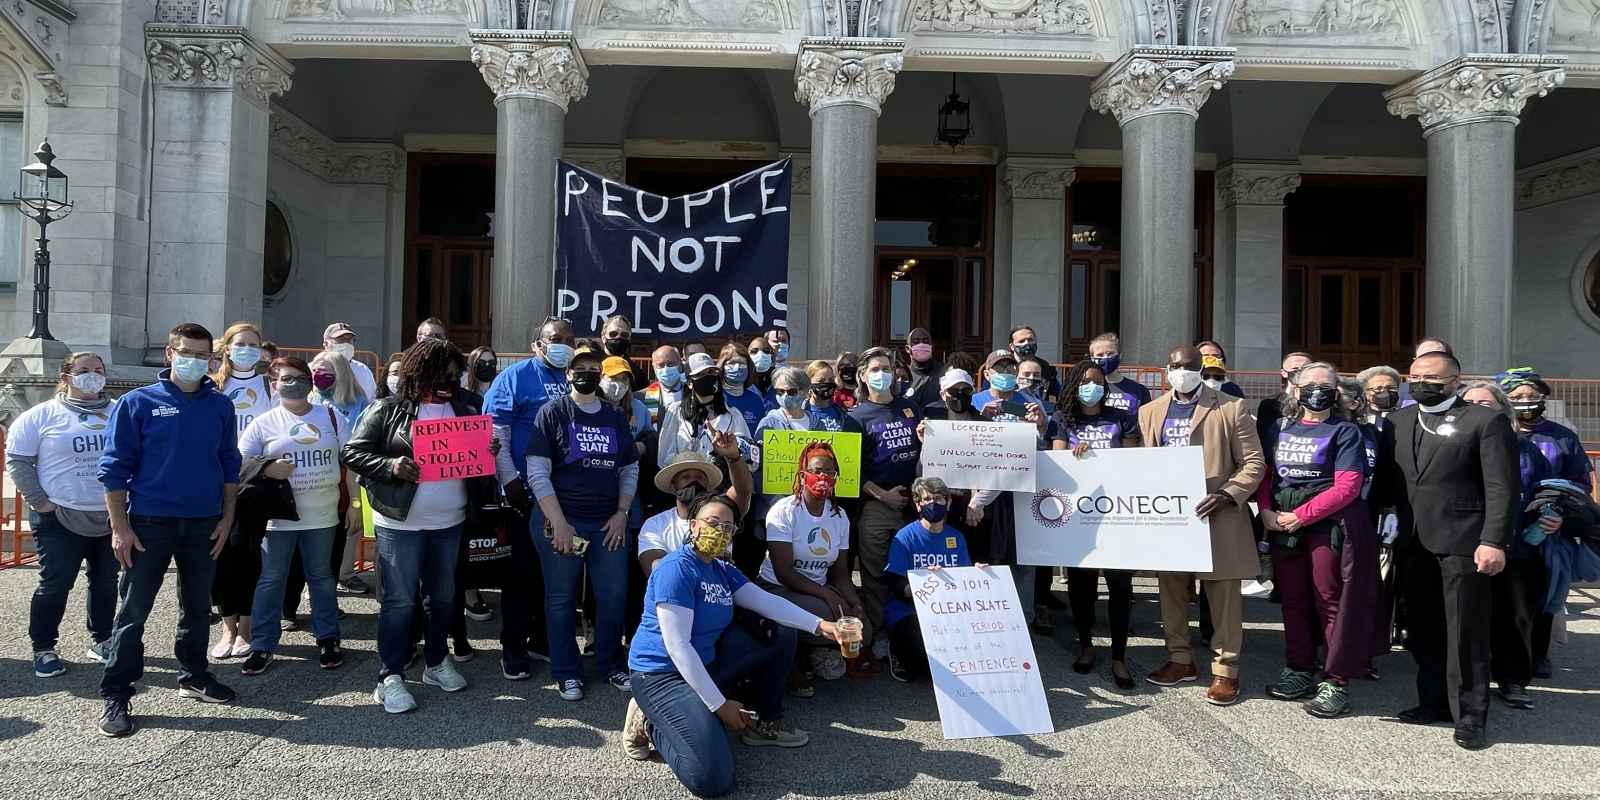 Group photo in front of the capitol after the Clean Slate press conference. A people not prisons sign can be seen.